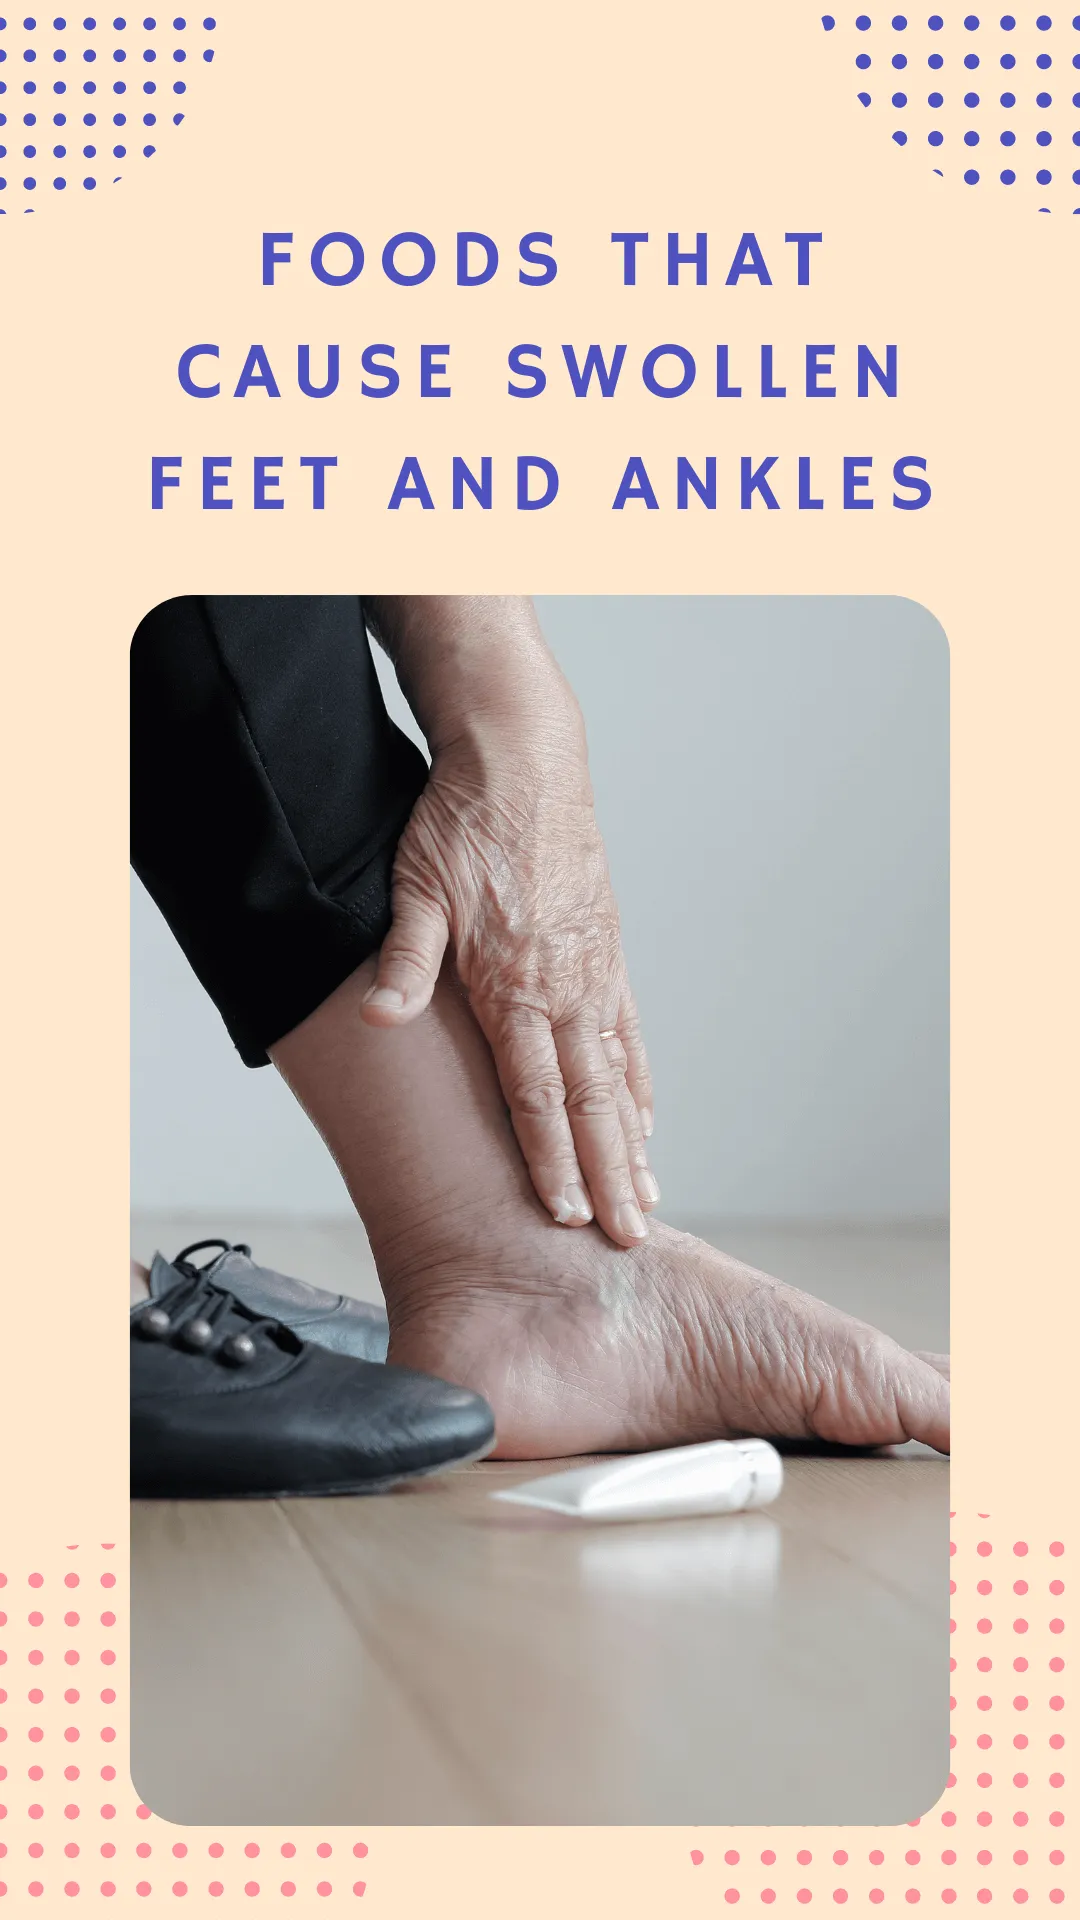 Foods That Cause Swollen Feet and Ankles